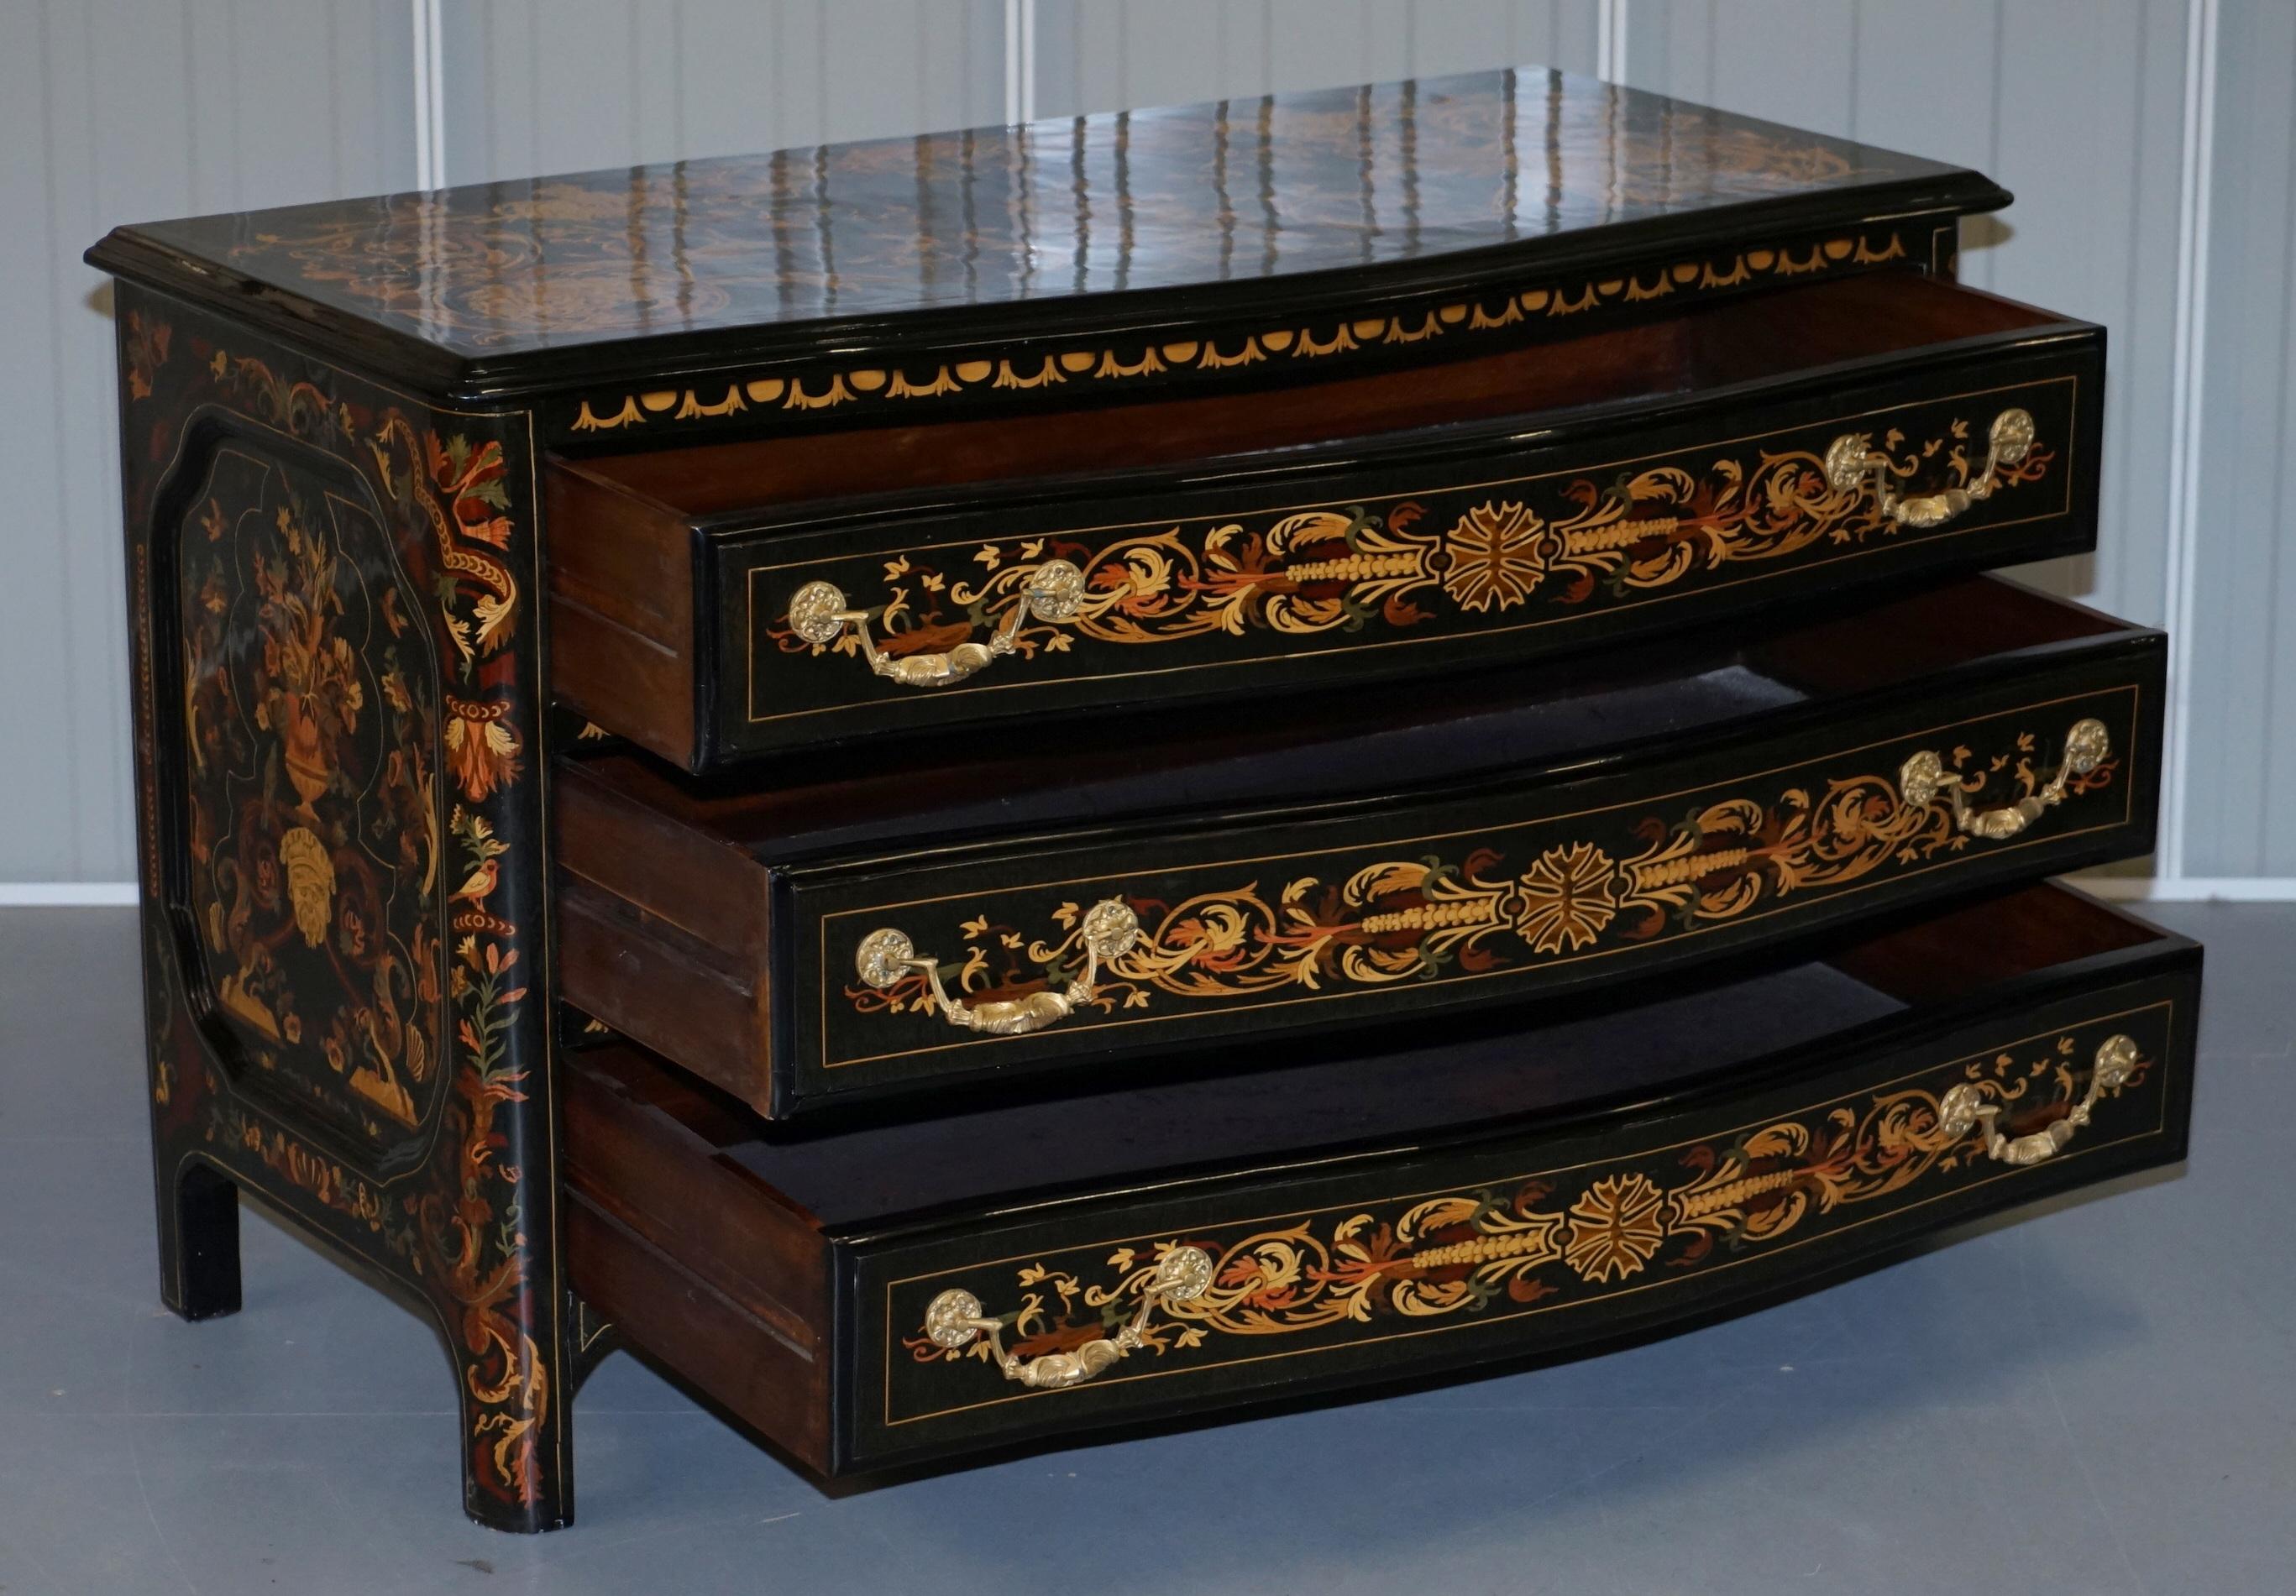 Italian Ornate Marquetry Inlaid Chest of Drawers with Black Lacquered Finish 13